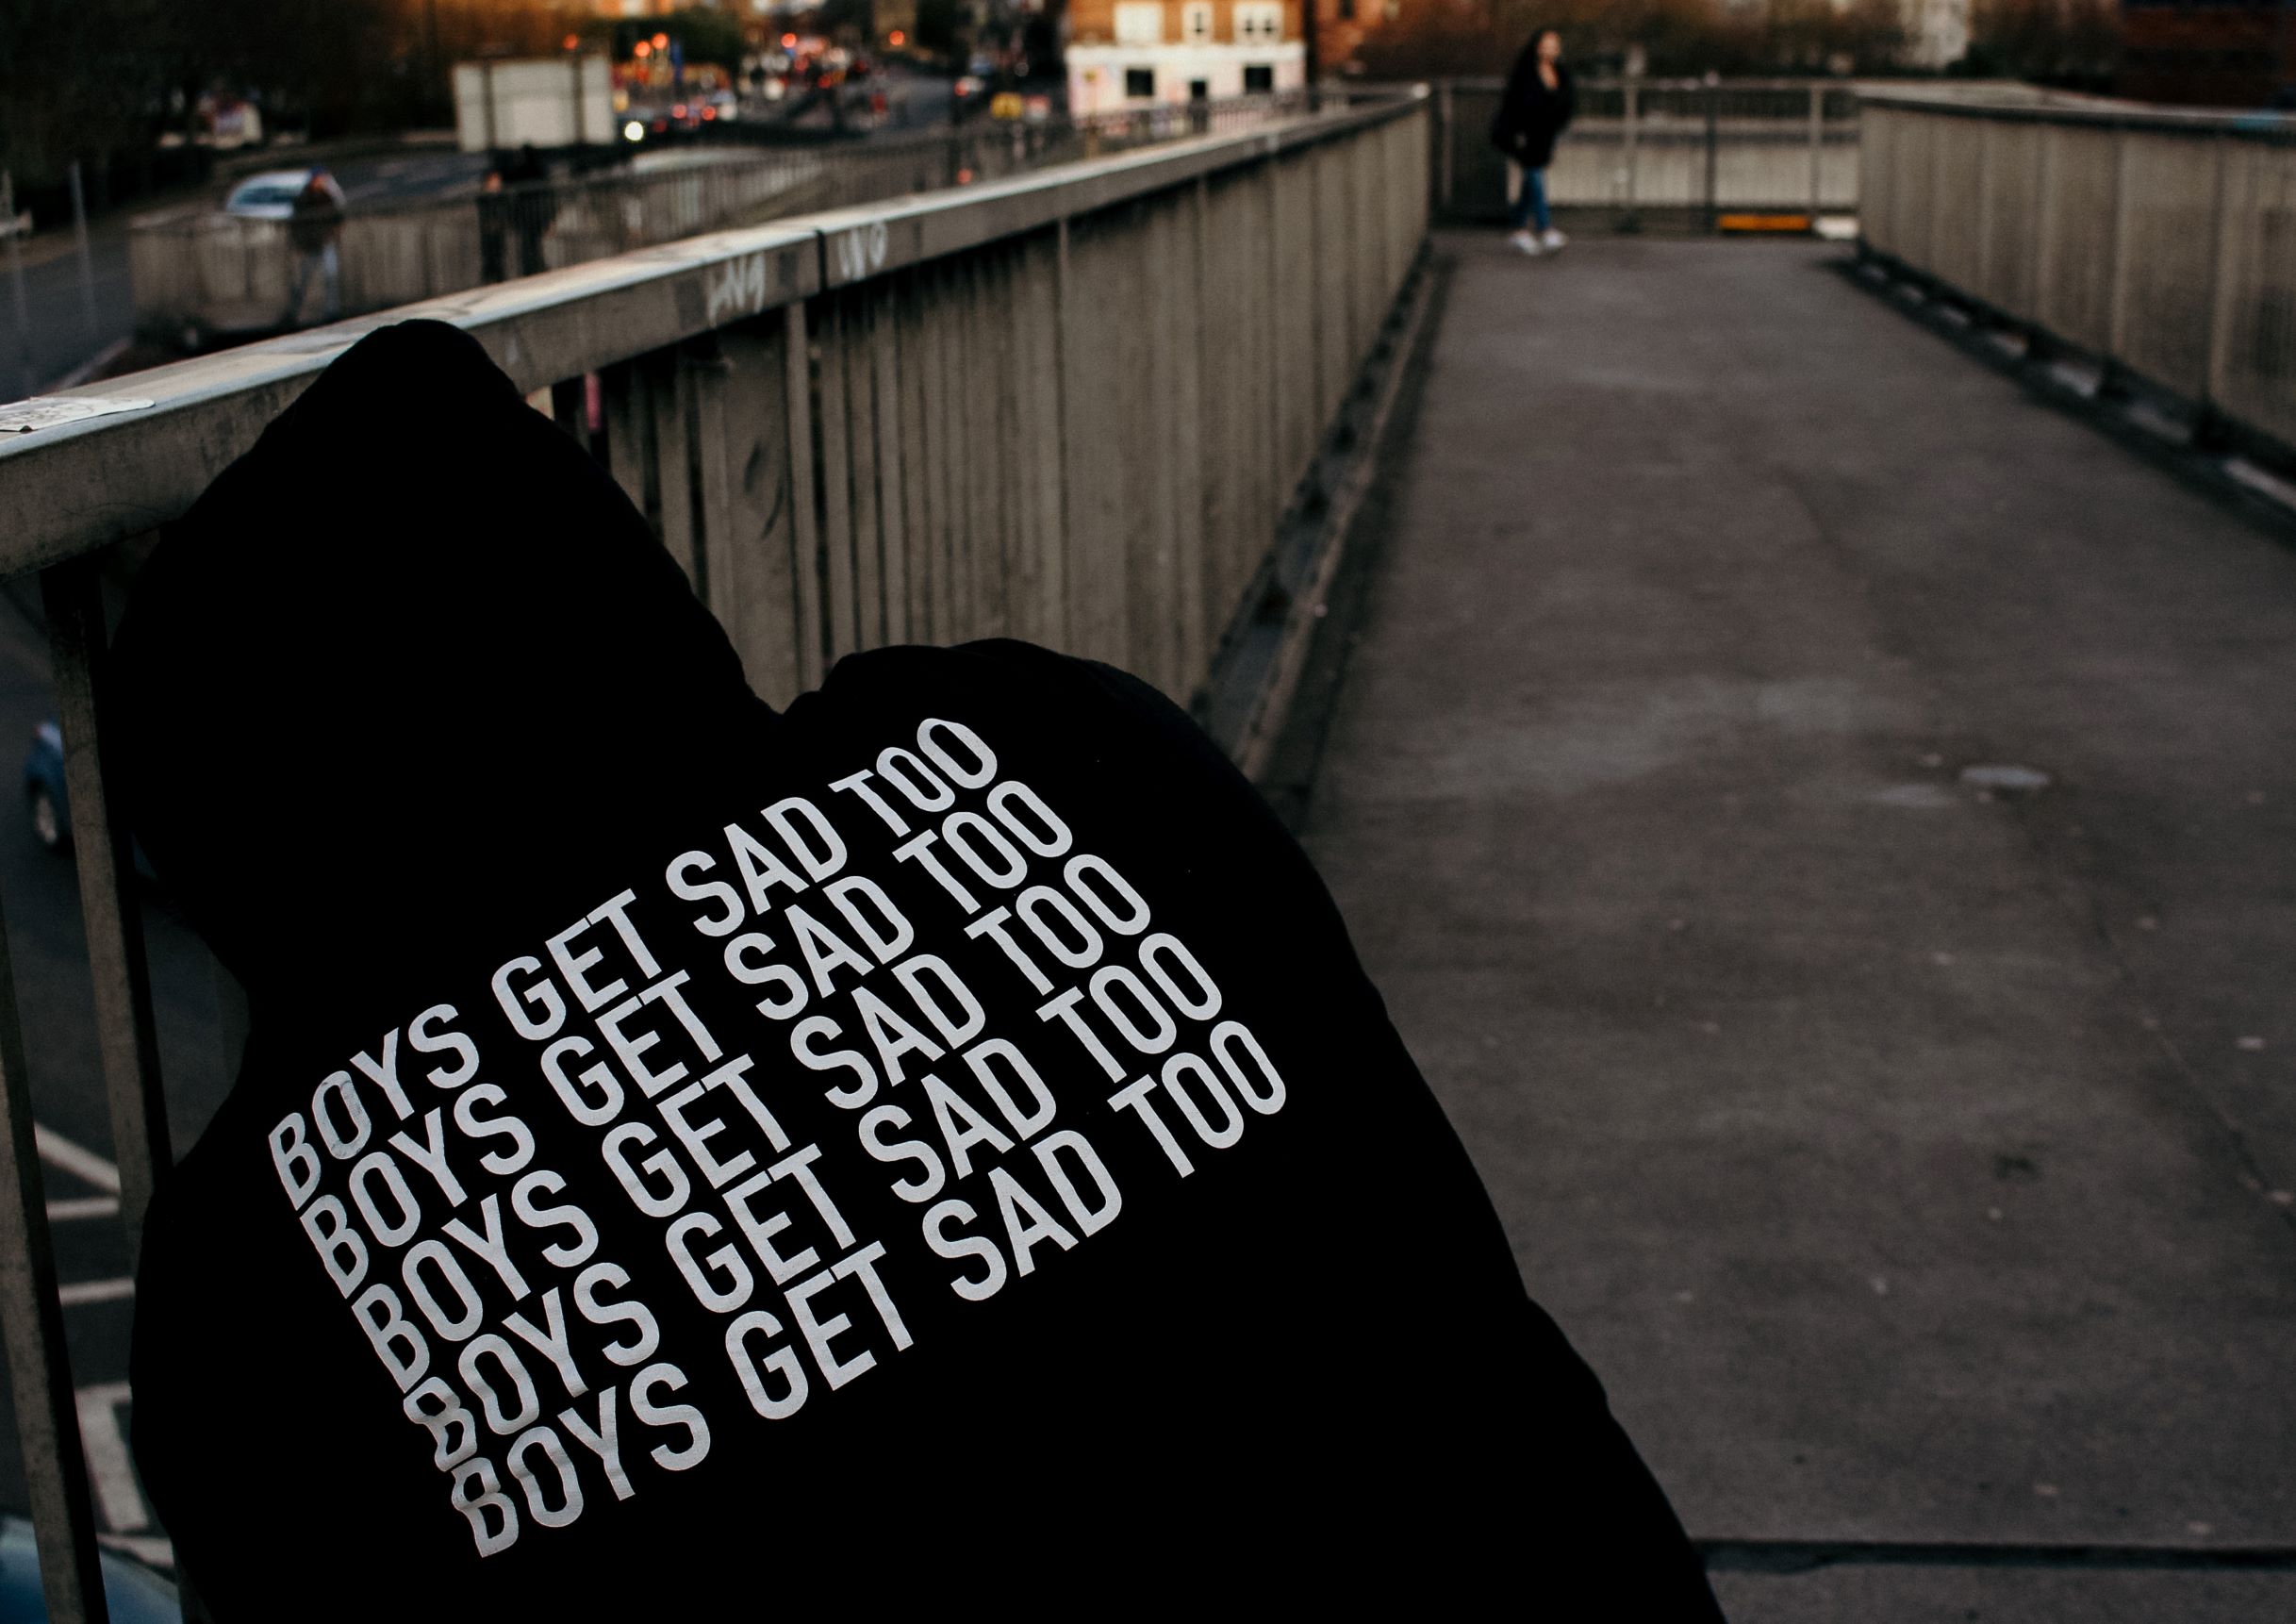 Back of a person wearing a black sweatshirt that says "Boys Get Sad Too." Colors are dark to represent depression in men.